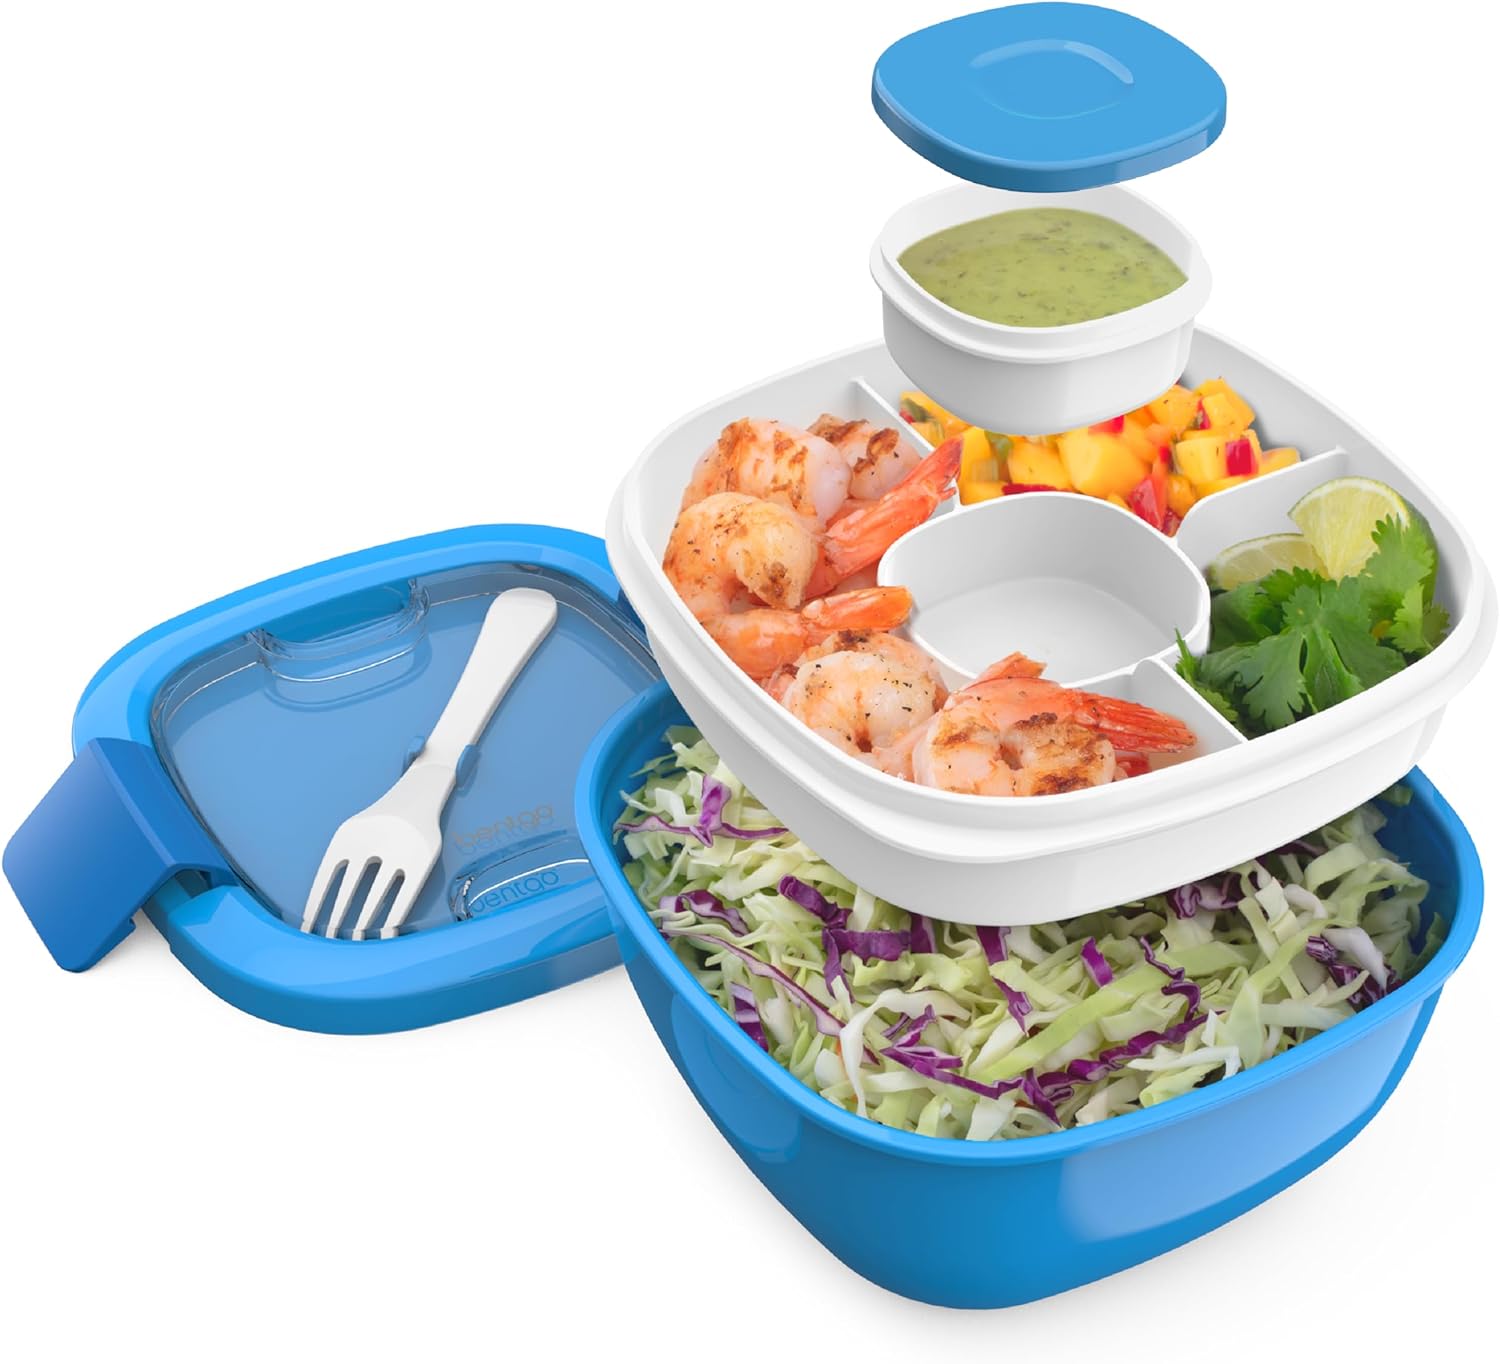 Don't Miss Your Chance to Save on the Bentgo® All-in-One Salad Container! Up to 20% Off